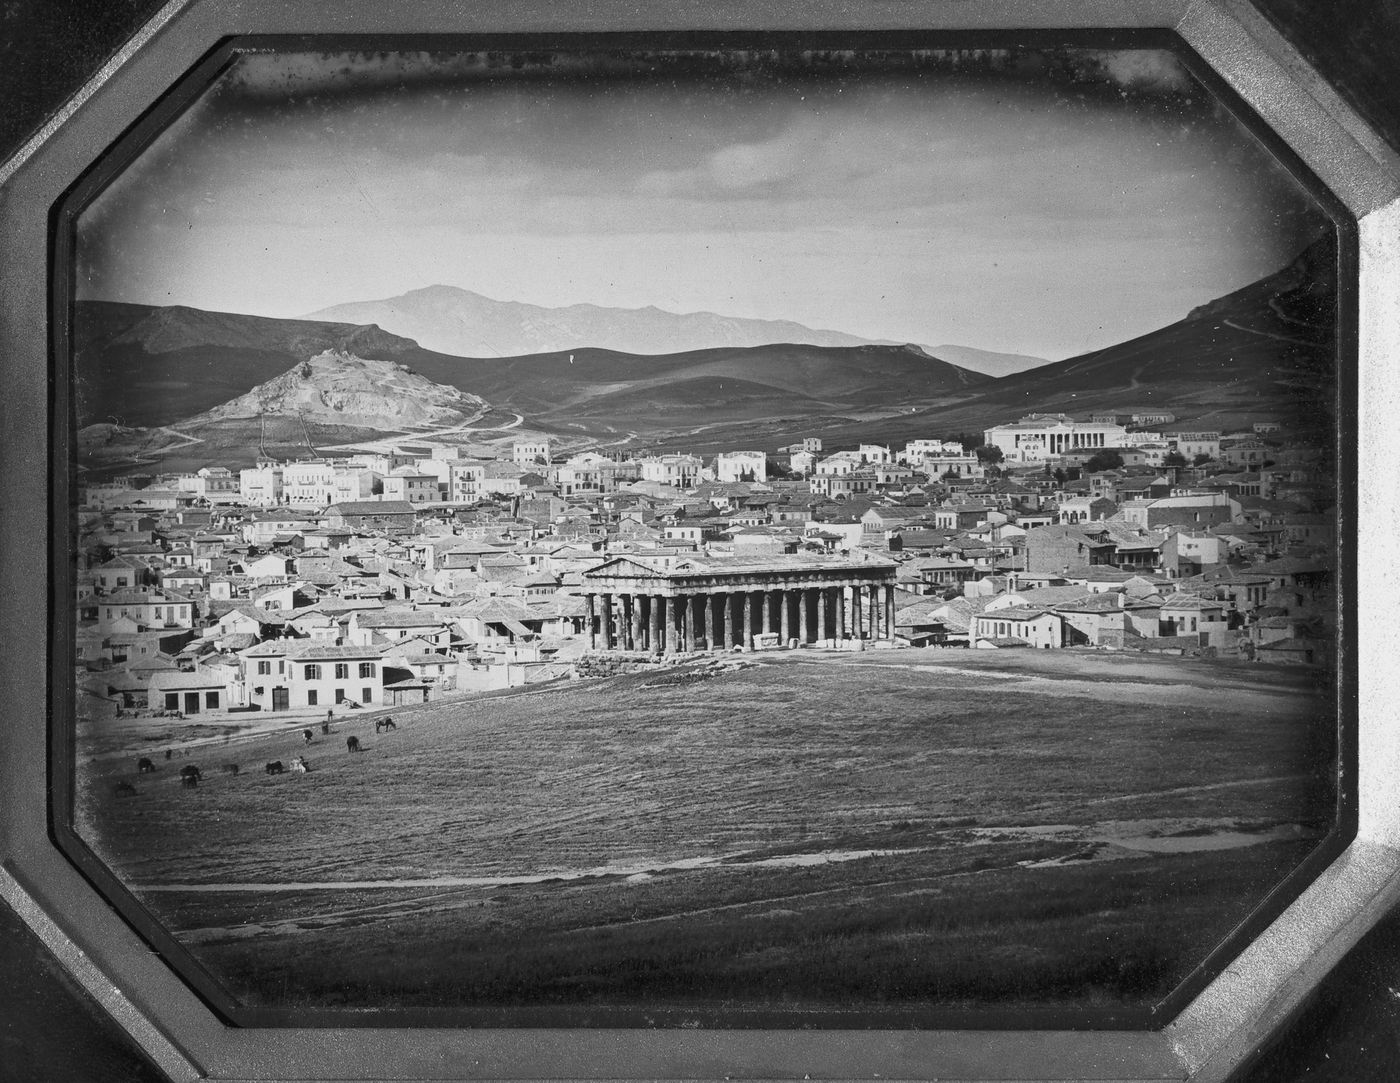 View of the Temple of Theseus and part of the city of Athens, Greece